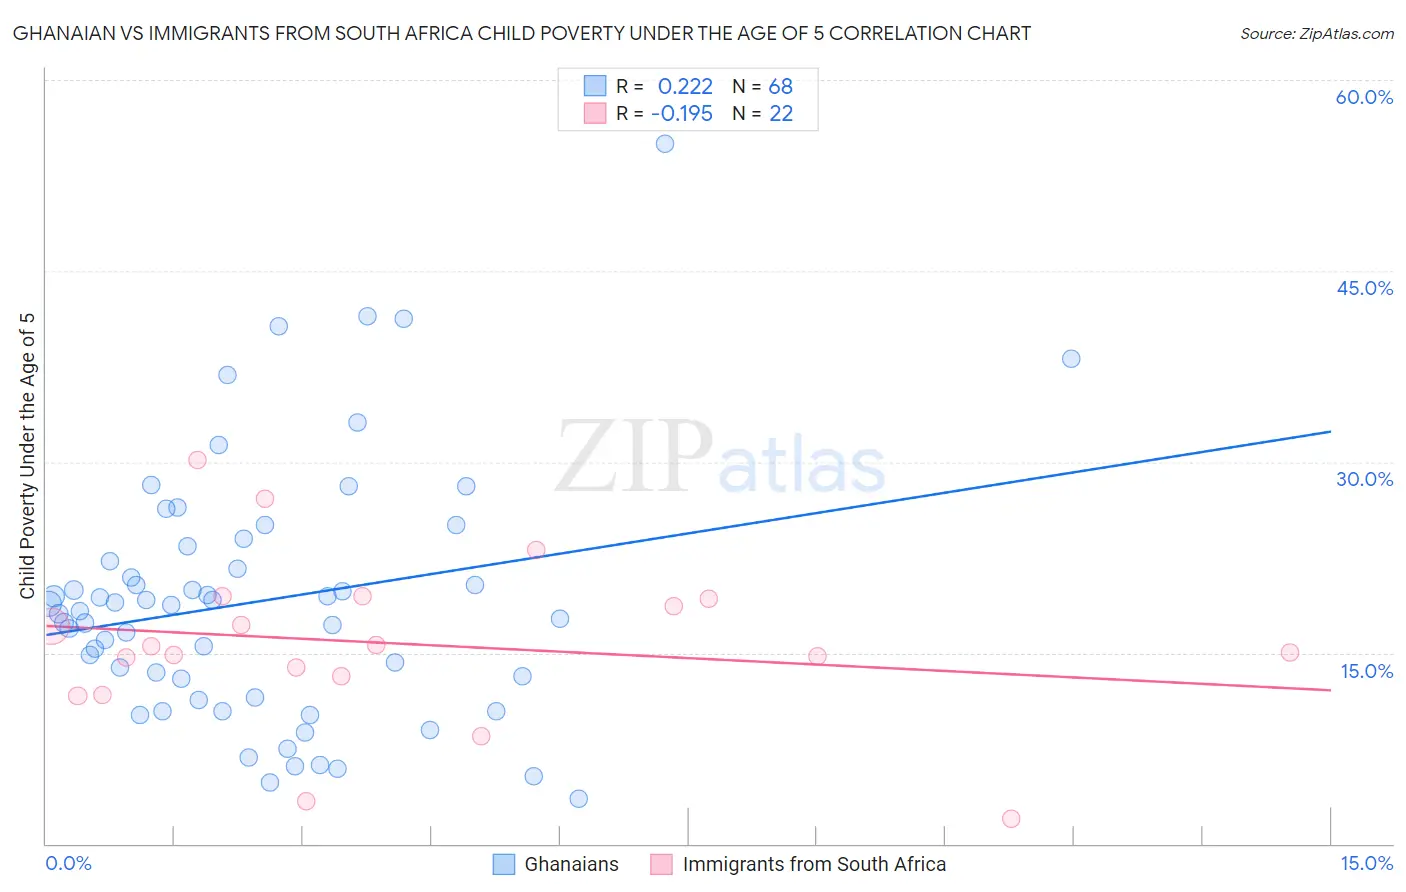 Ghanaian vs Immigrants from South Africa Child Poverty Under the Age of 5